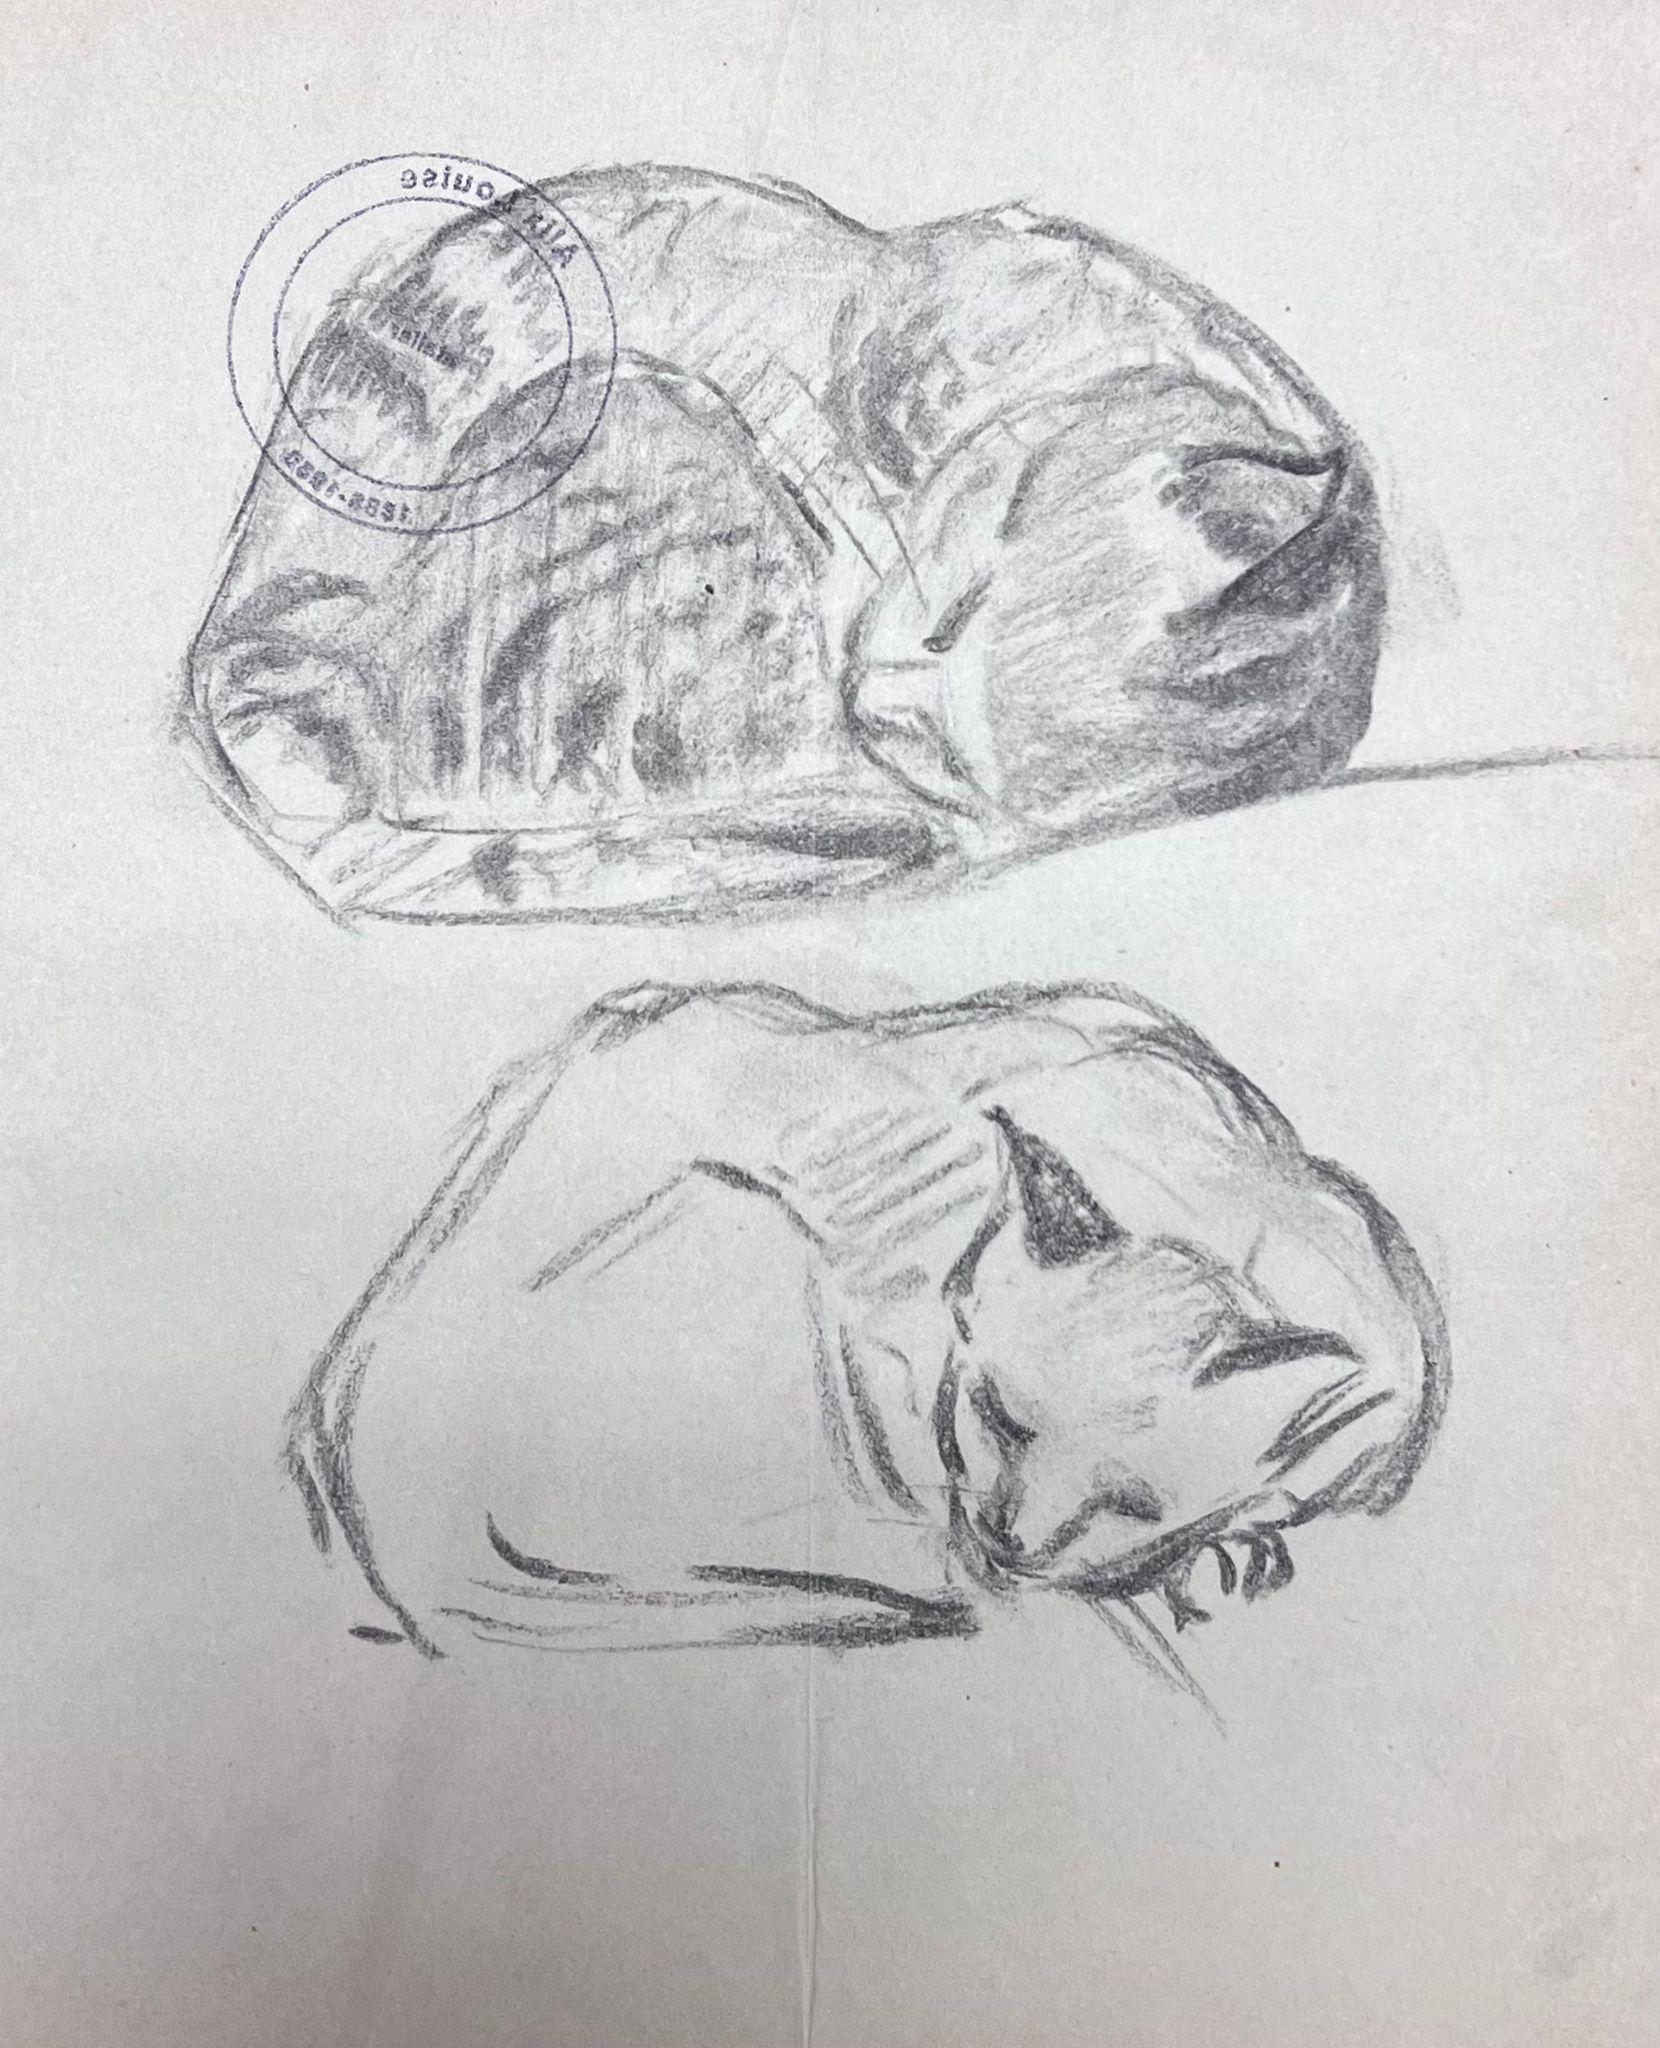 Kittens
by Louise Alix (French, 1888-1980) *see notes below
provenance stamp to the back 
pencil drawing on artist paper, unframed
measures: 10 high by 8.25 inches wide
condition: overall very good and sound, a few scuffs and marks to the surface